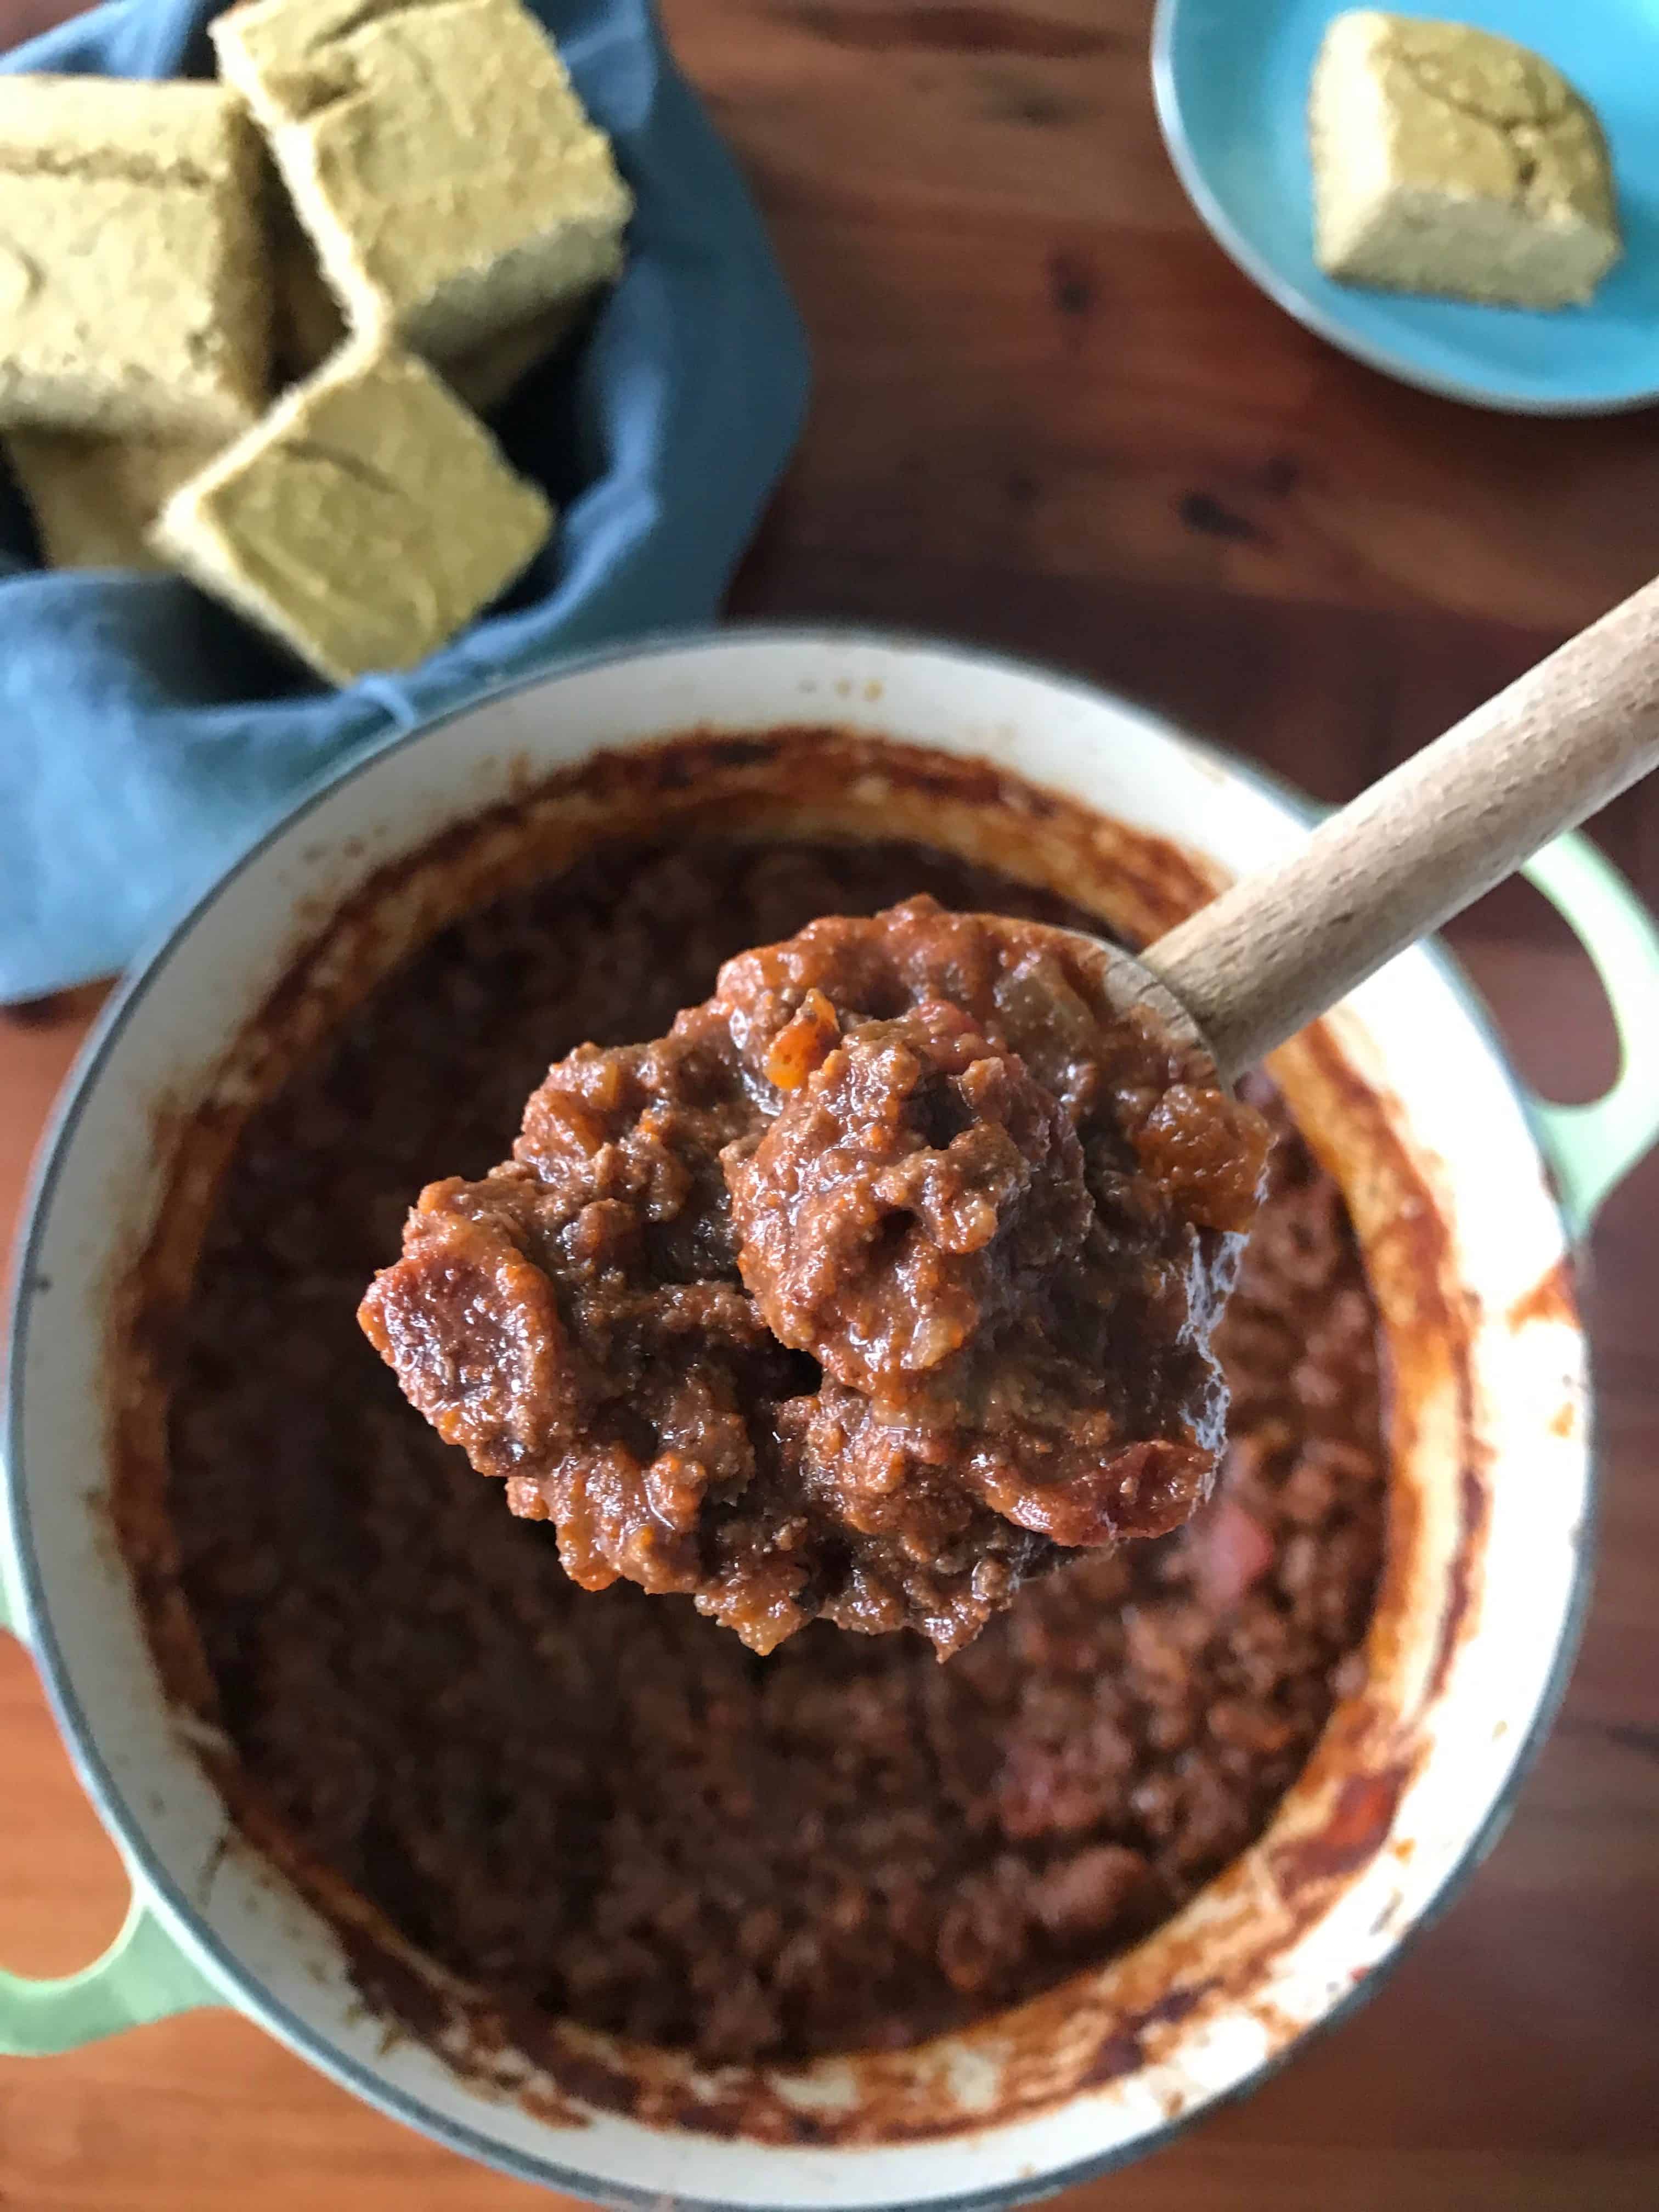 Smoky Bacon Chili on a spoon over a big pot with cornbread on the side